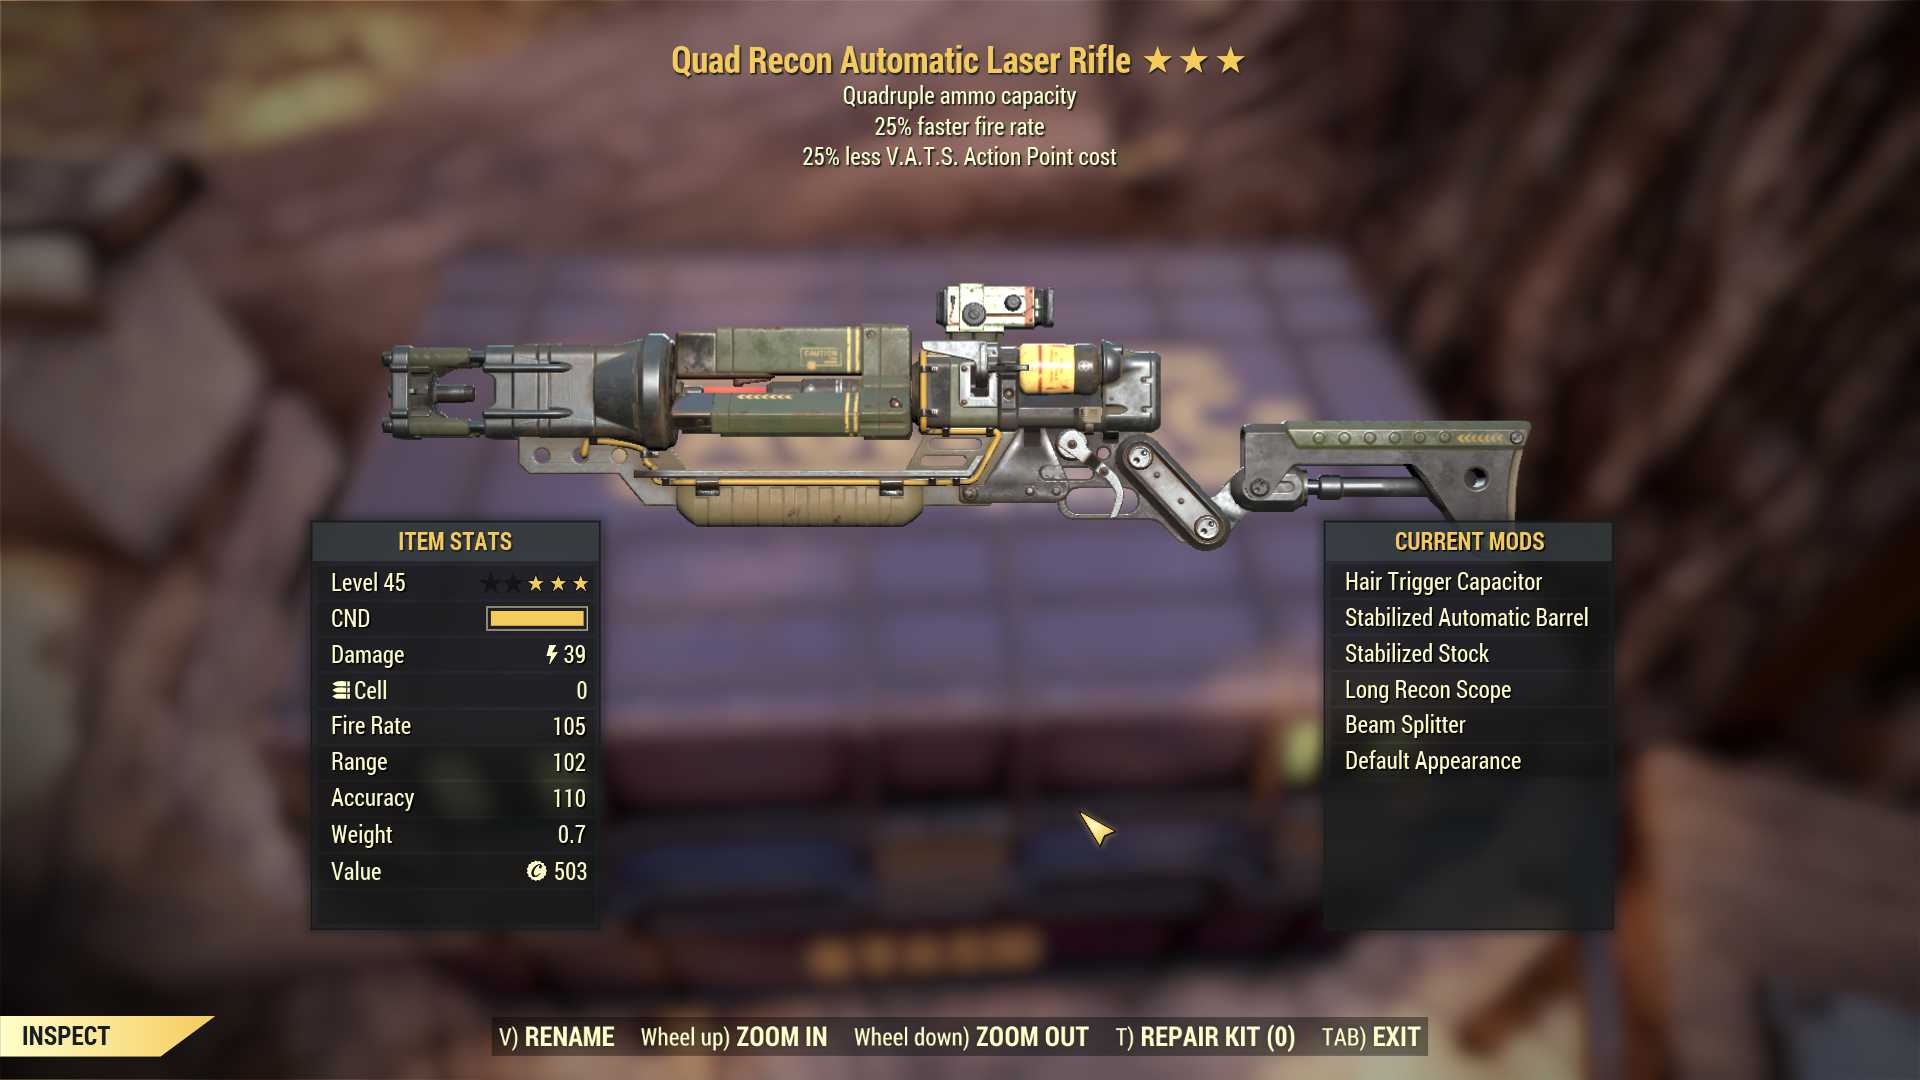 Quad Laser rifle (25% faster fire rate, 25% less VATS AP cost)